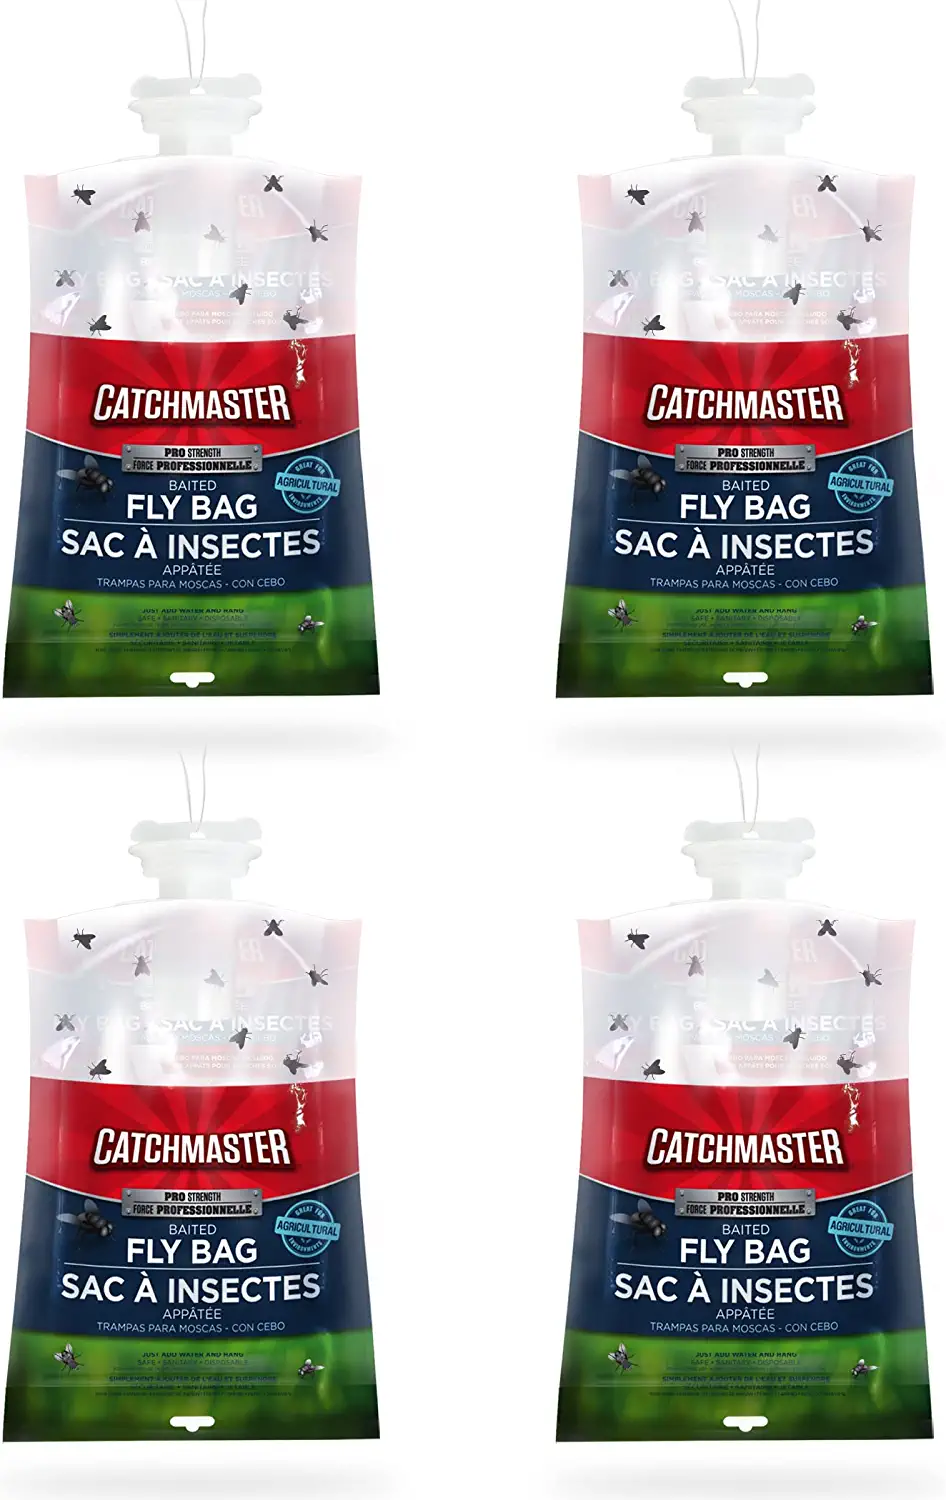 10. Pro Series Disposable Fly Bag Trap by Catchmaster